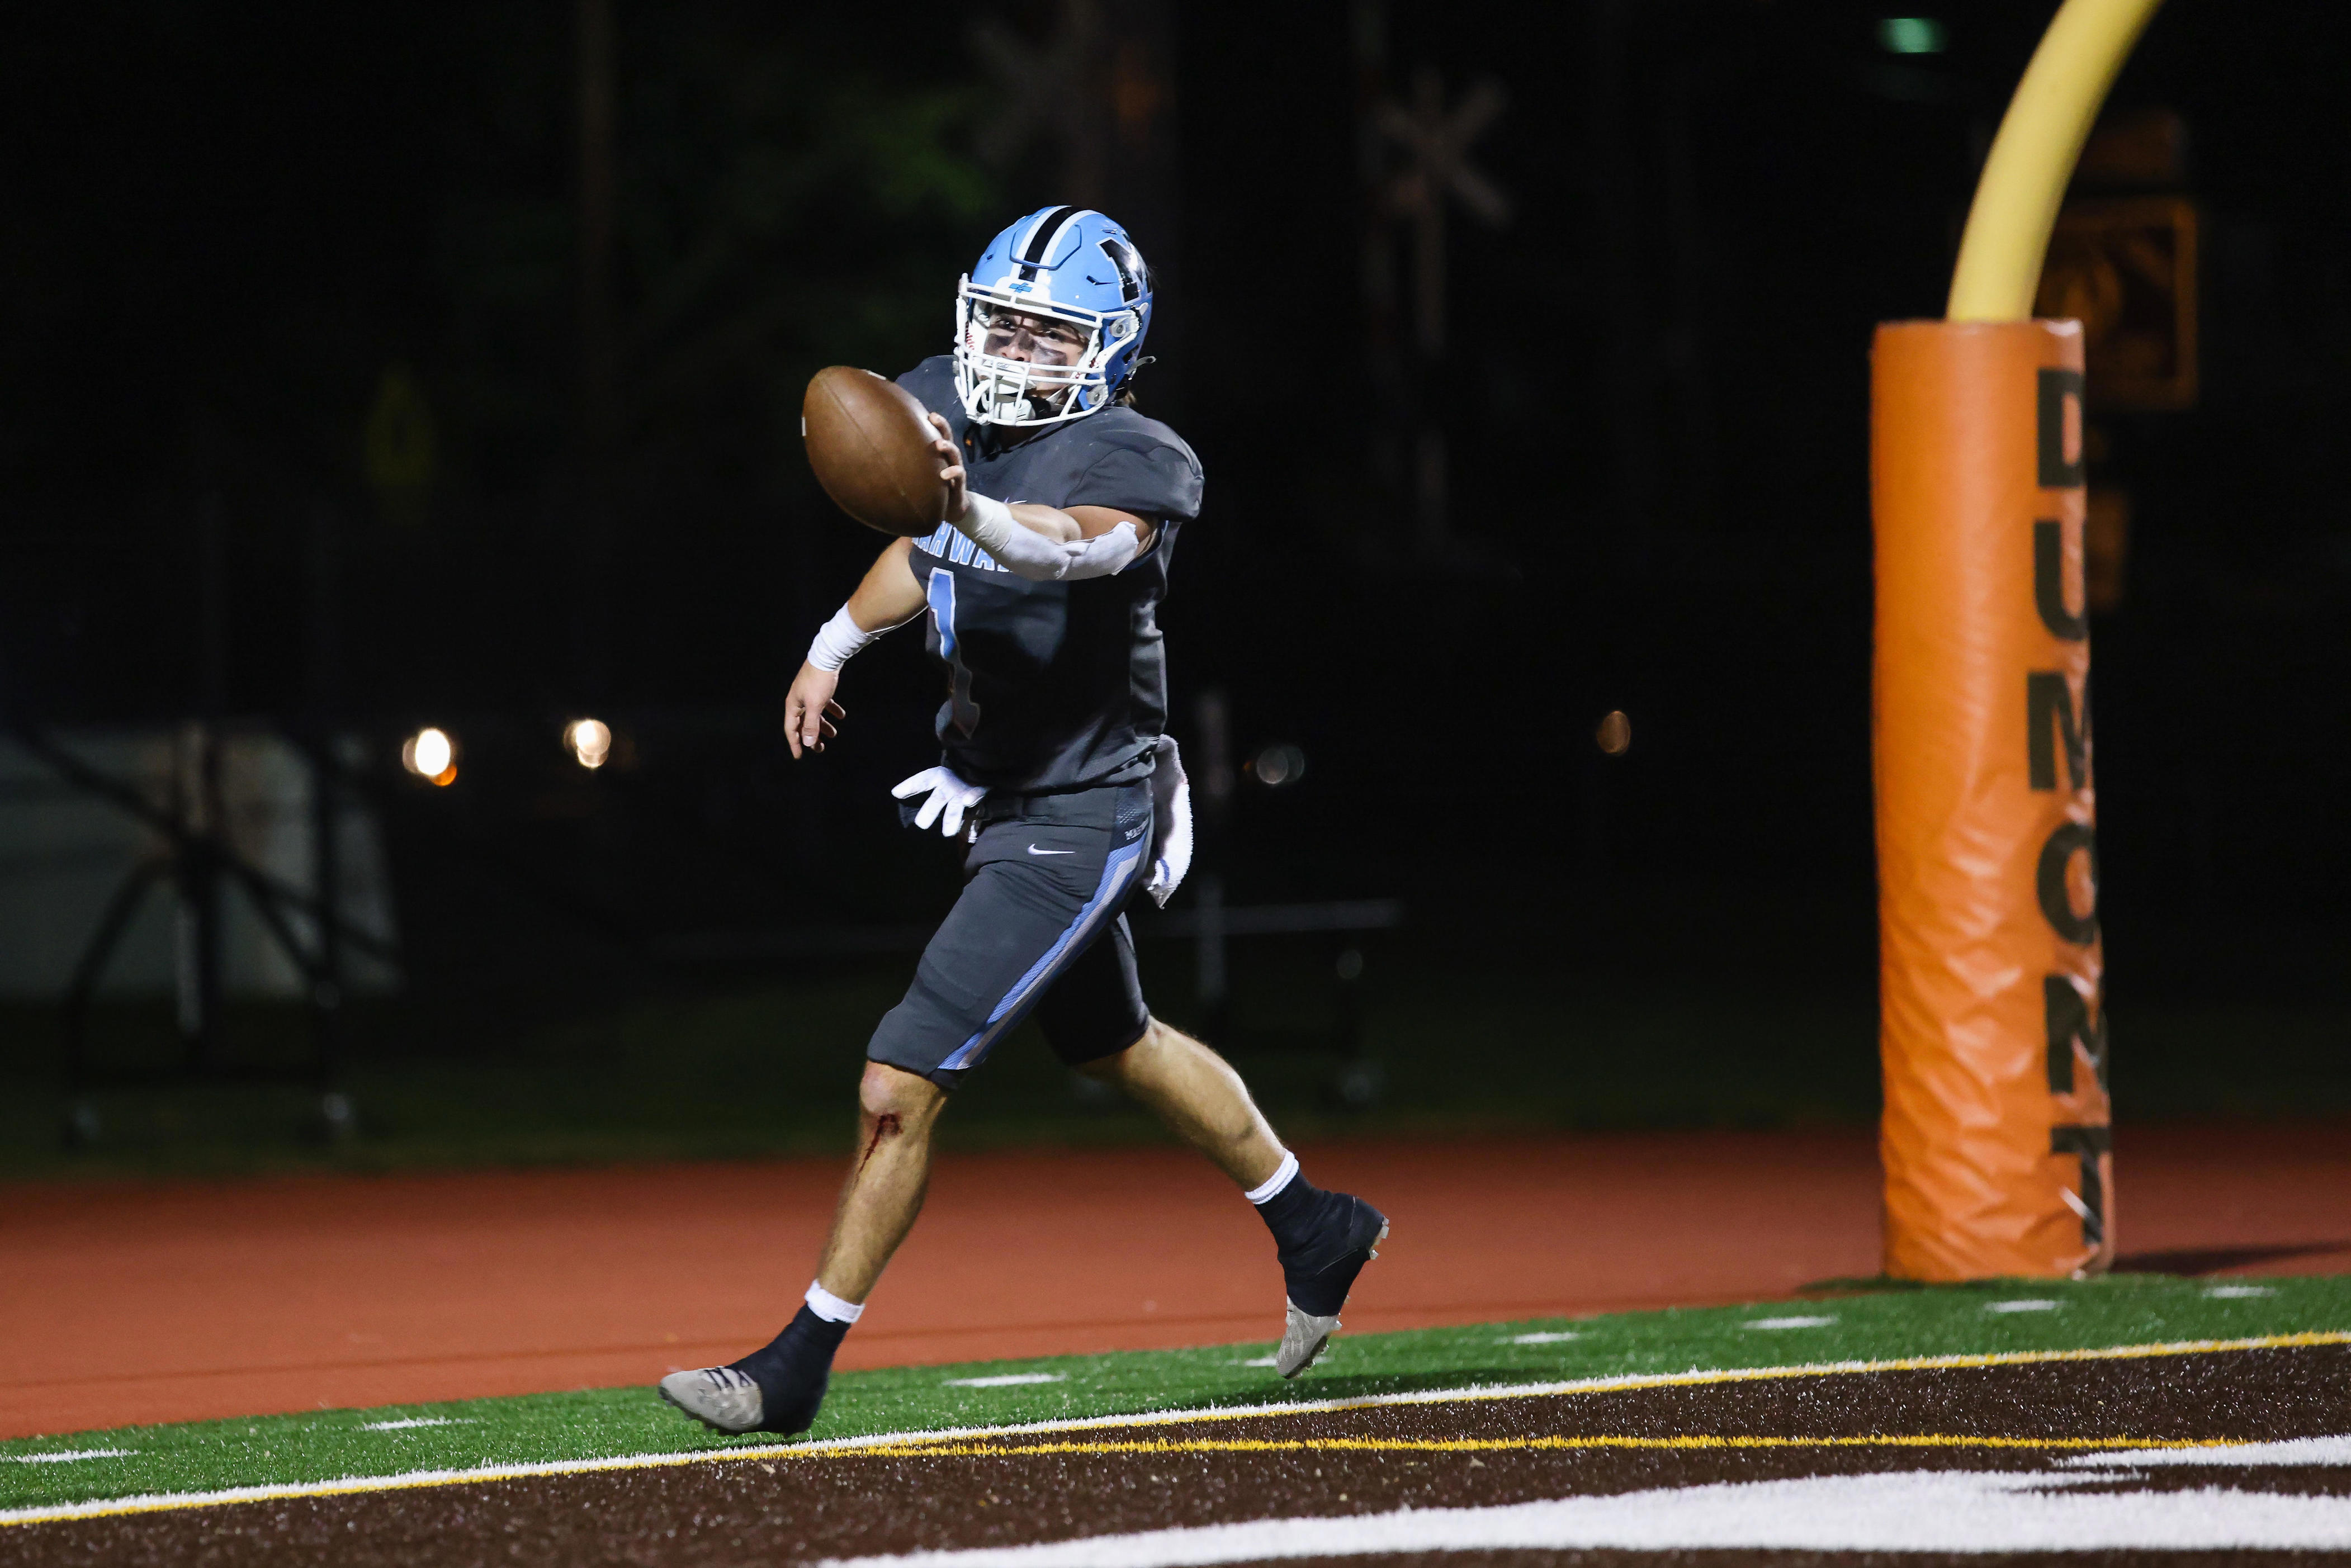 Mahwah football looking like a serious contender with big win over Tenafly